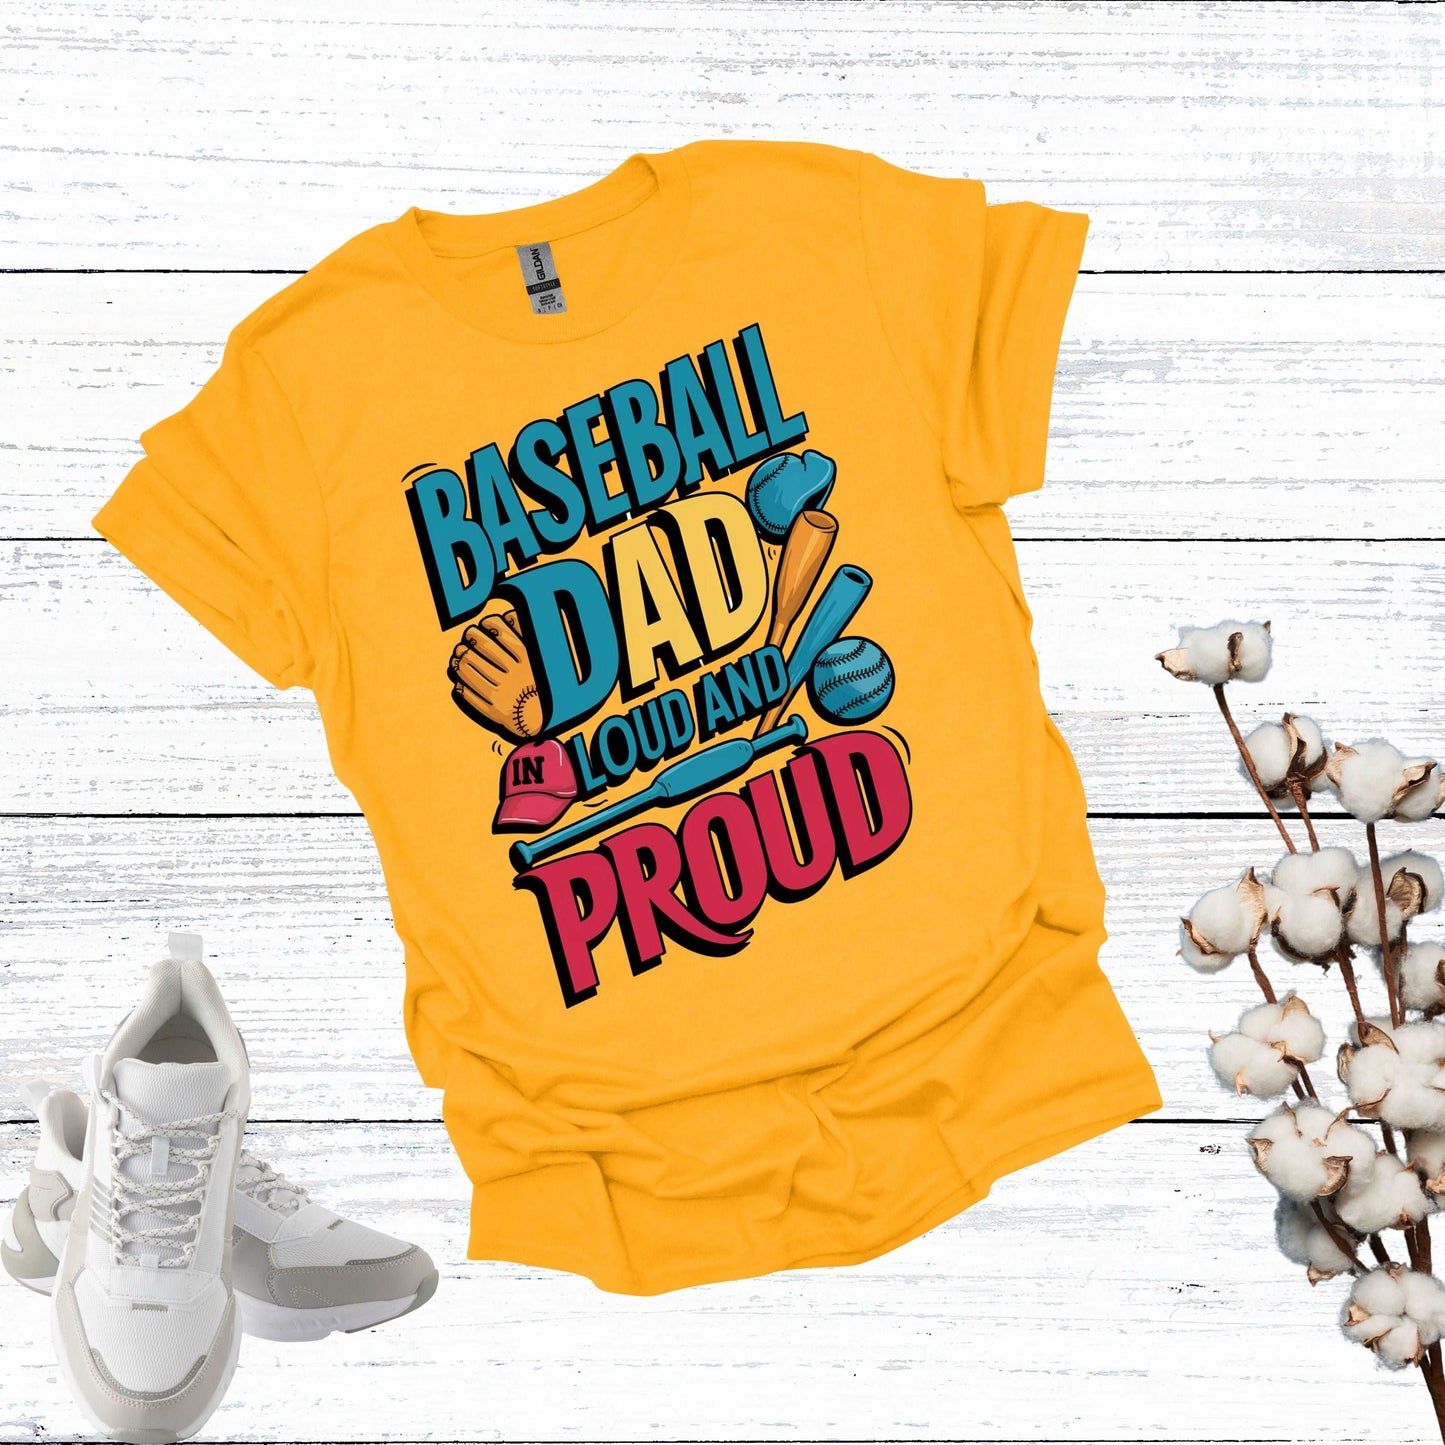 Baseball Dad Gold Shirt - Fathers are Loud and Proud